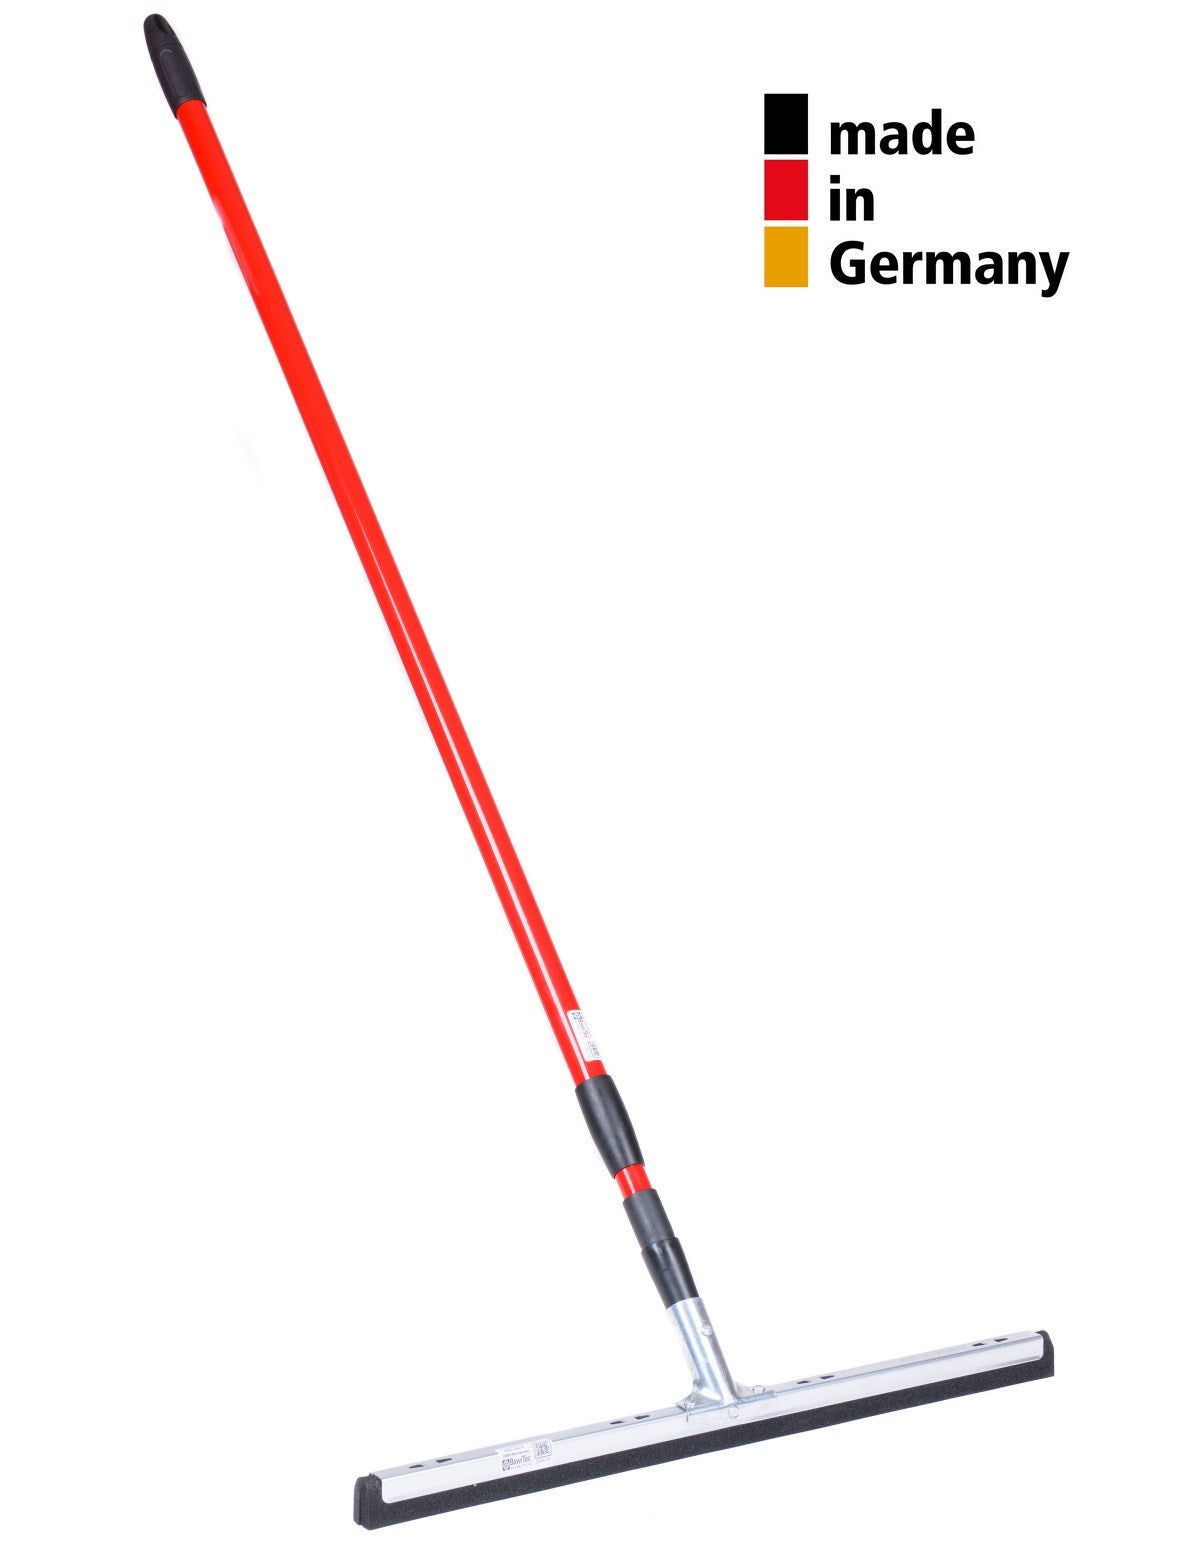 Water squeegee water squeegee 45cm wide with metal telescopic handle max. length 155cm